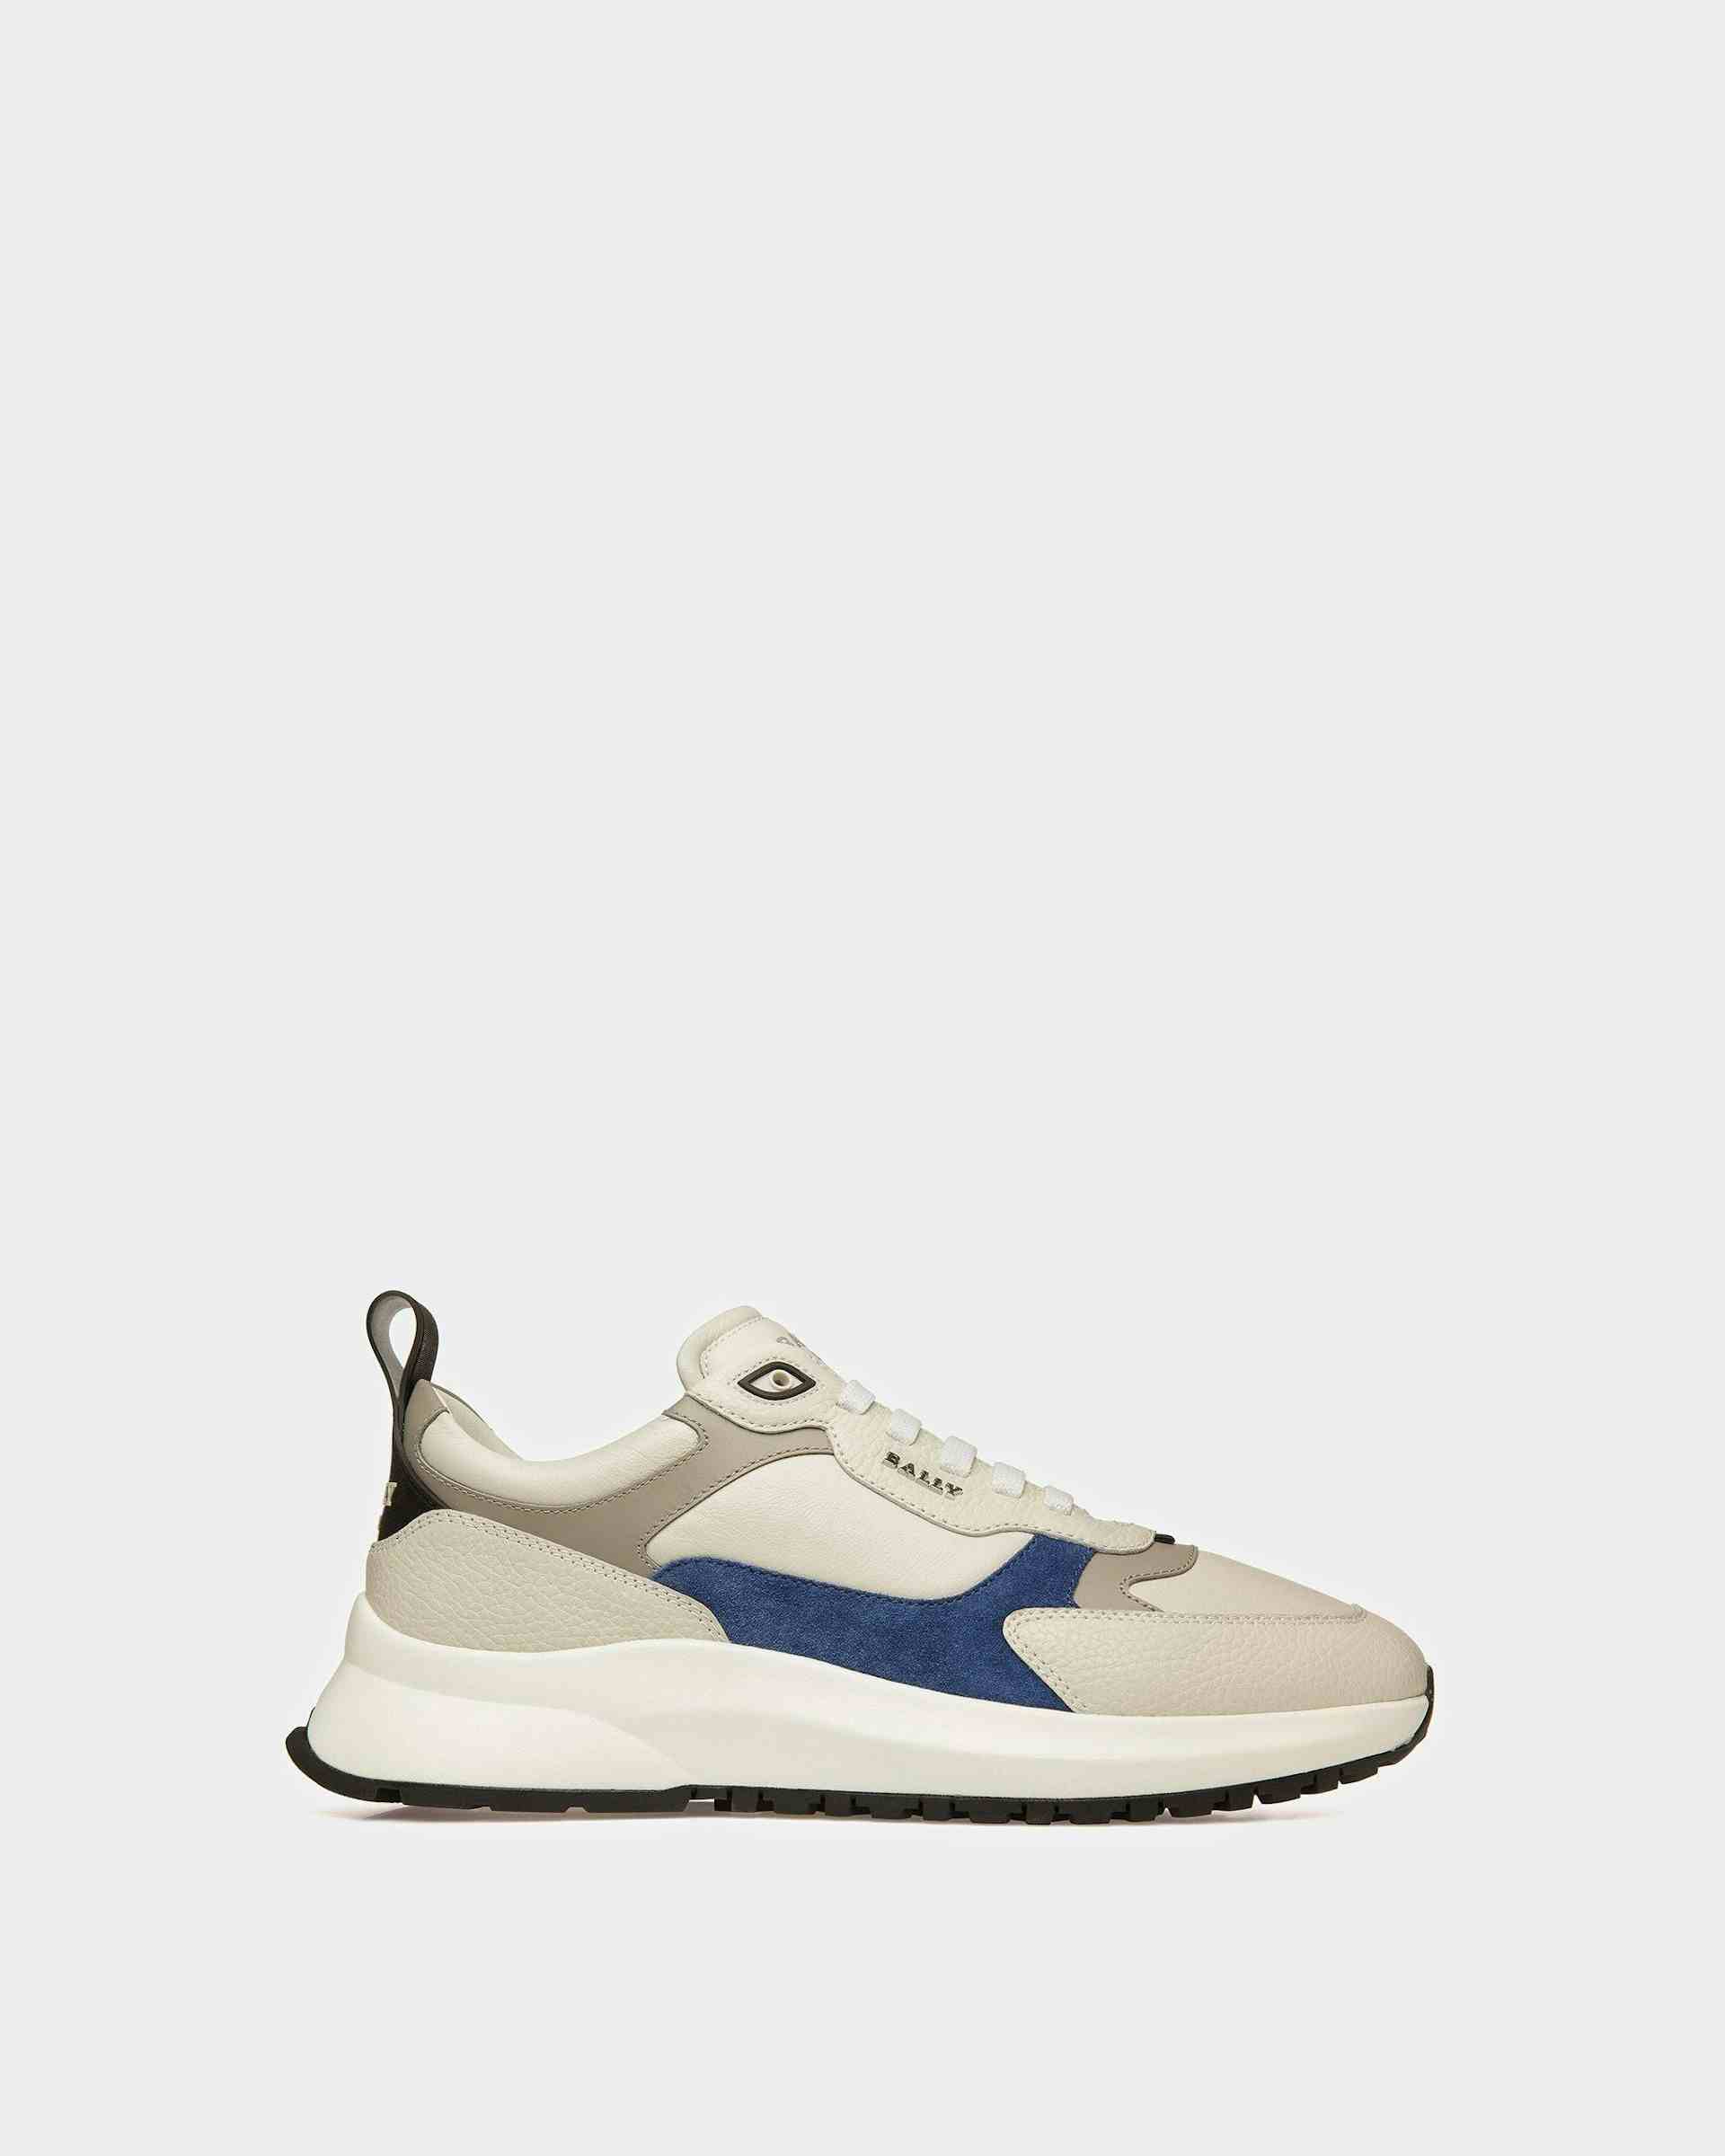 Dave Leather And Fabric Sneakers In Dusty White And Blue Neon - Men's - Bally